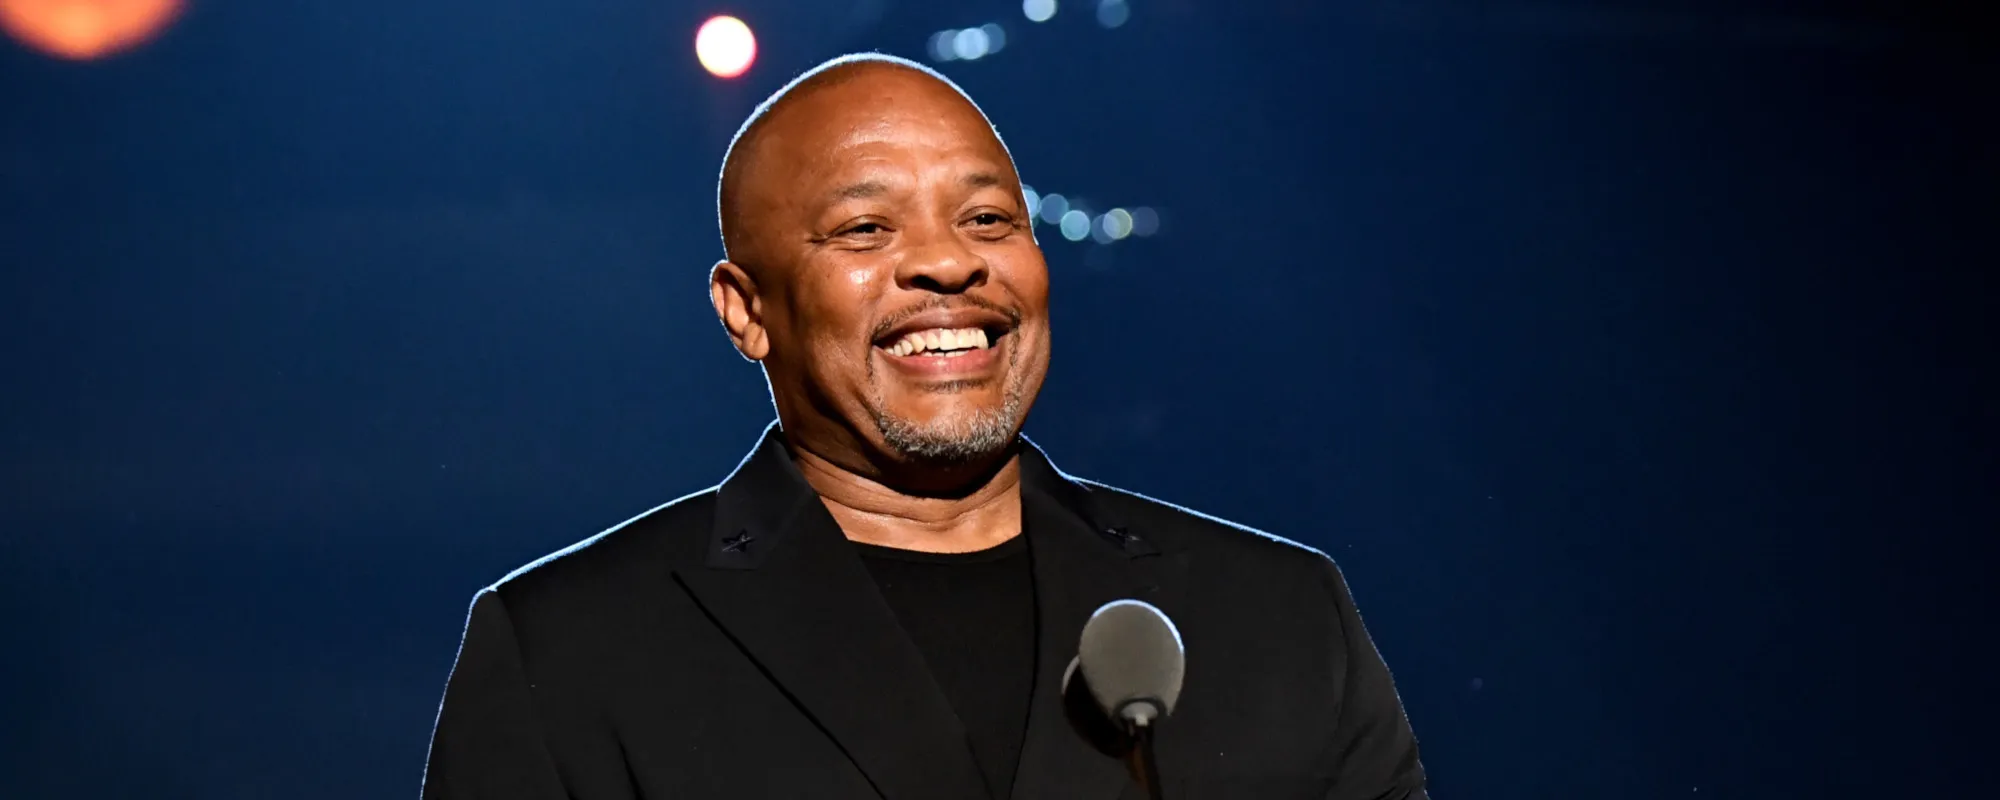 Dr. Dre Receives ASCAP’s First-Ever Hip-Hop Icon Award